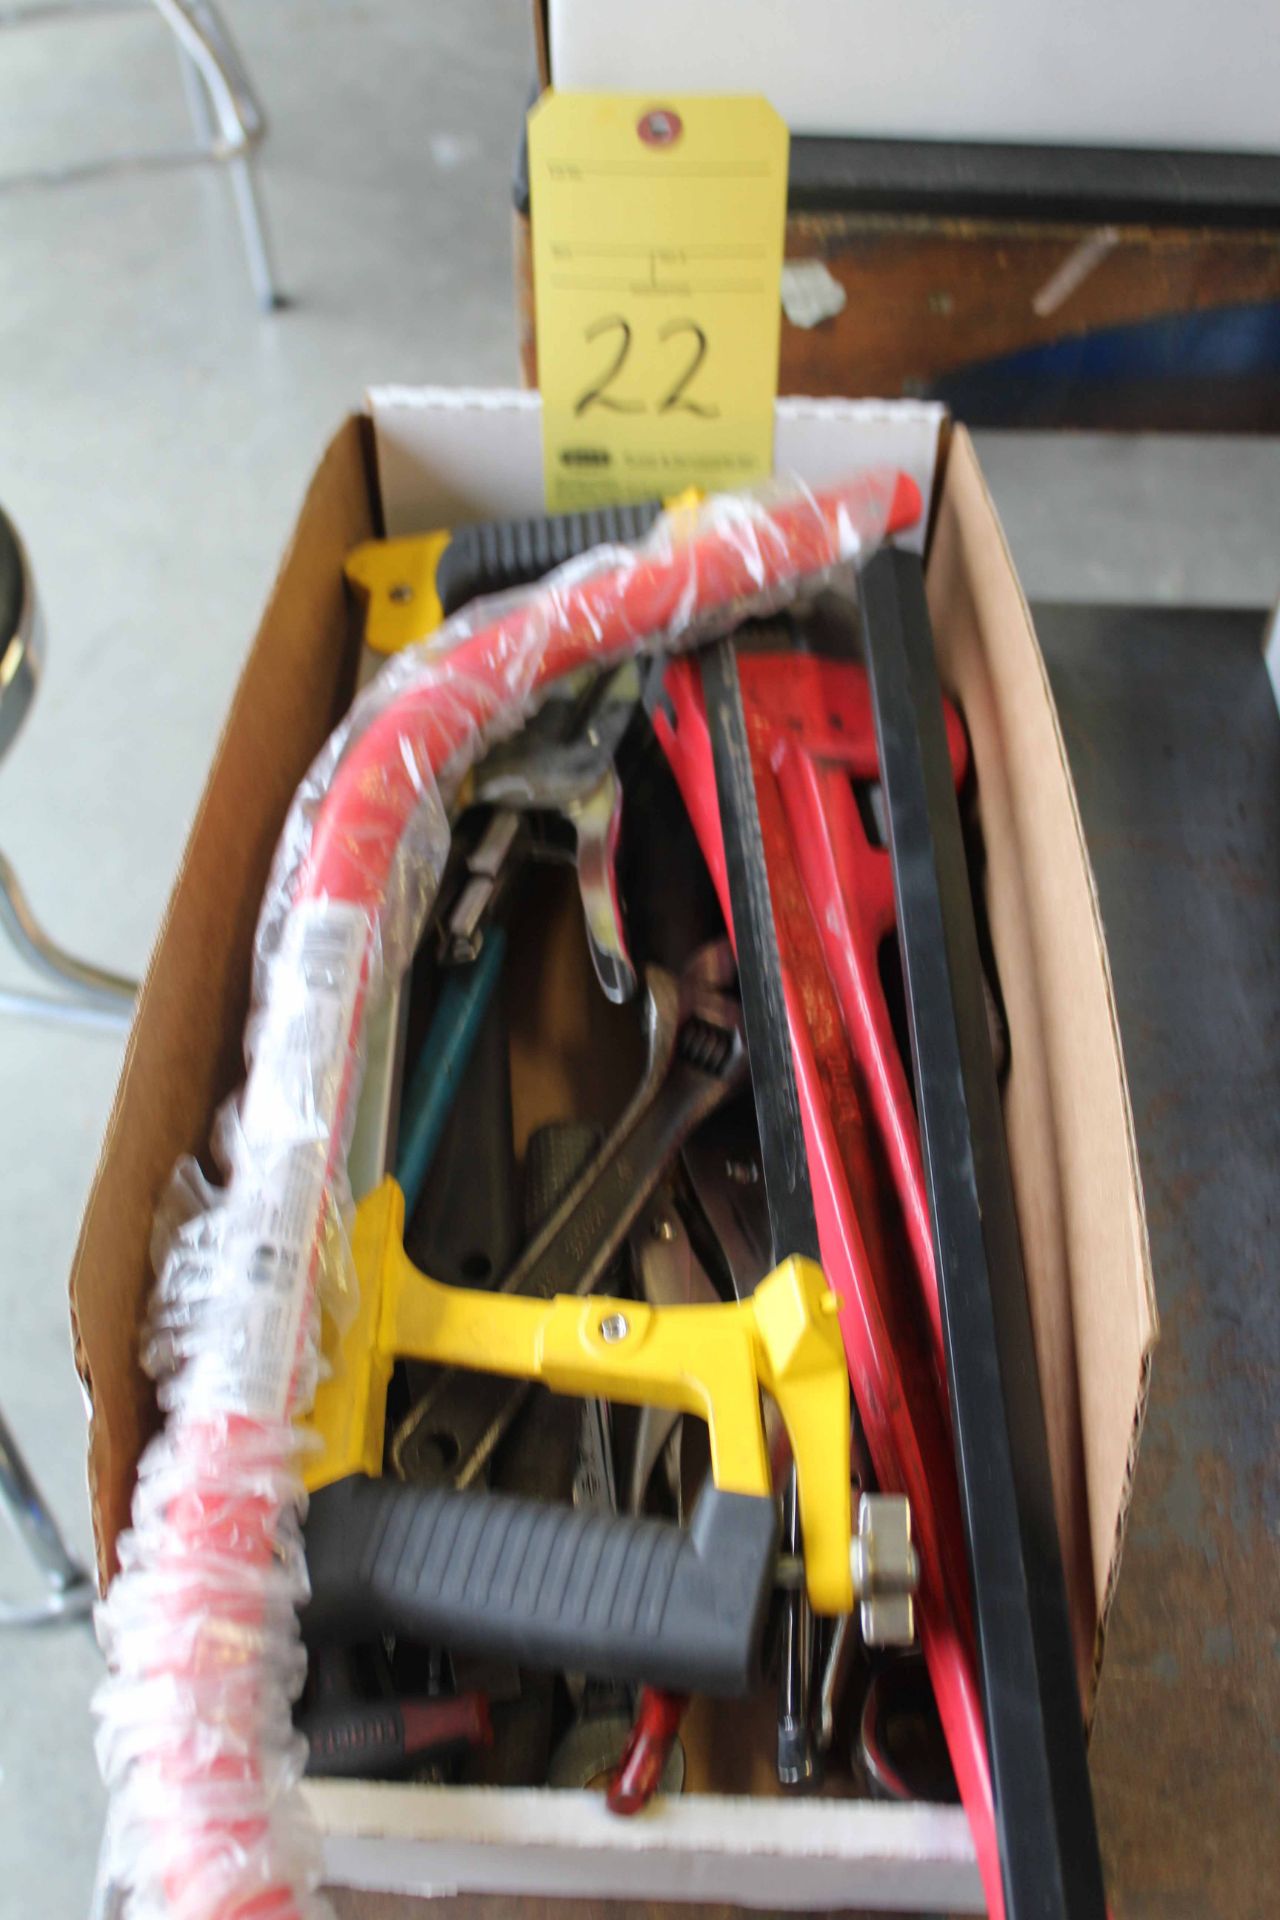 LOT CONSISTING OF: pipe wrench, saws & assorted wrenches (in one box)